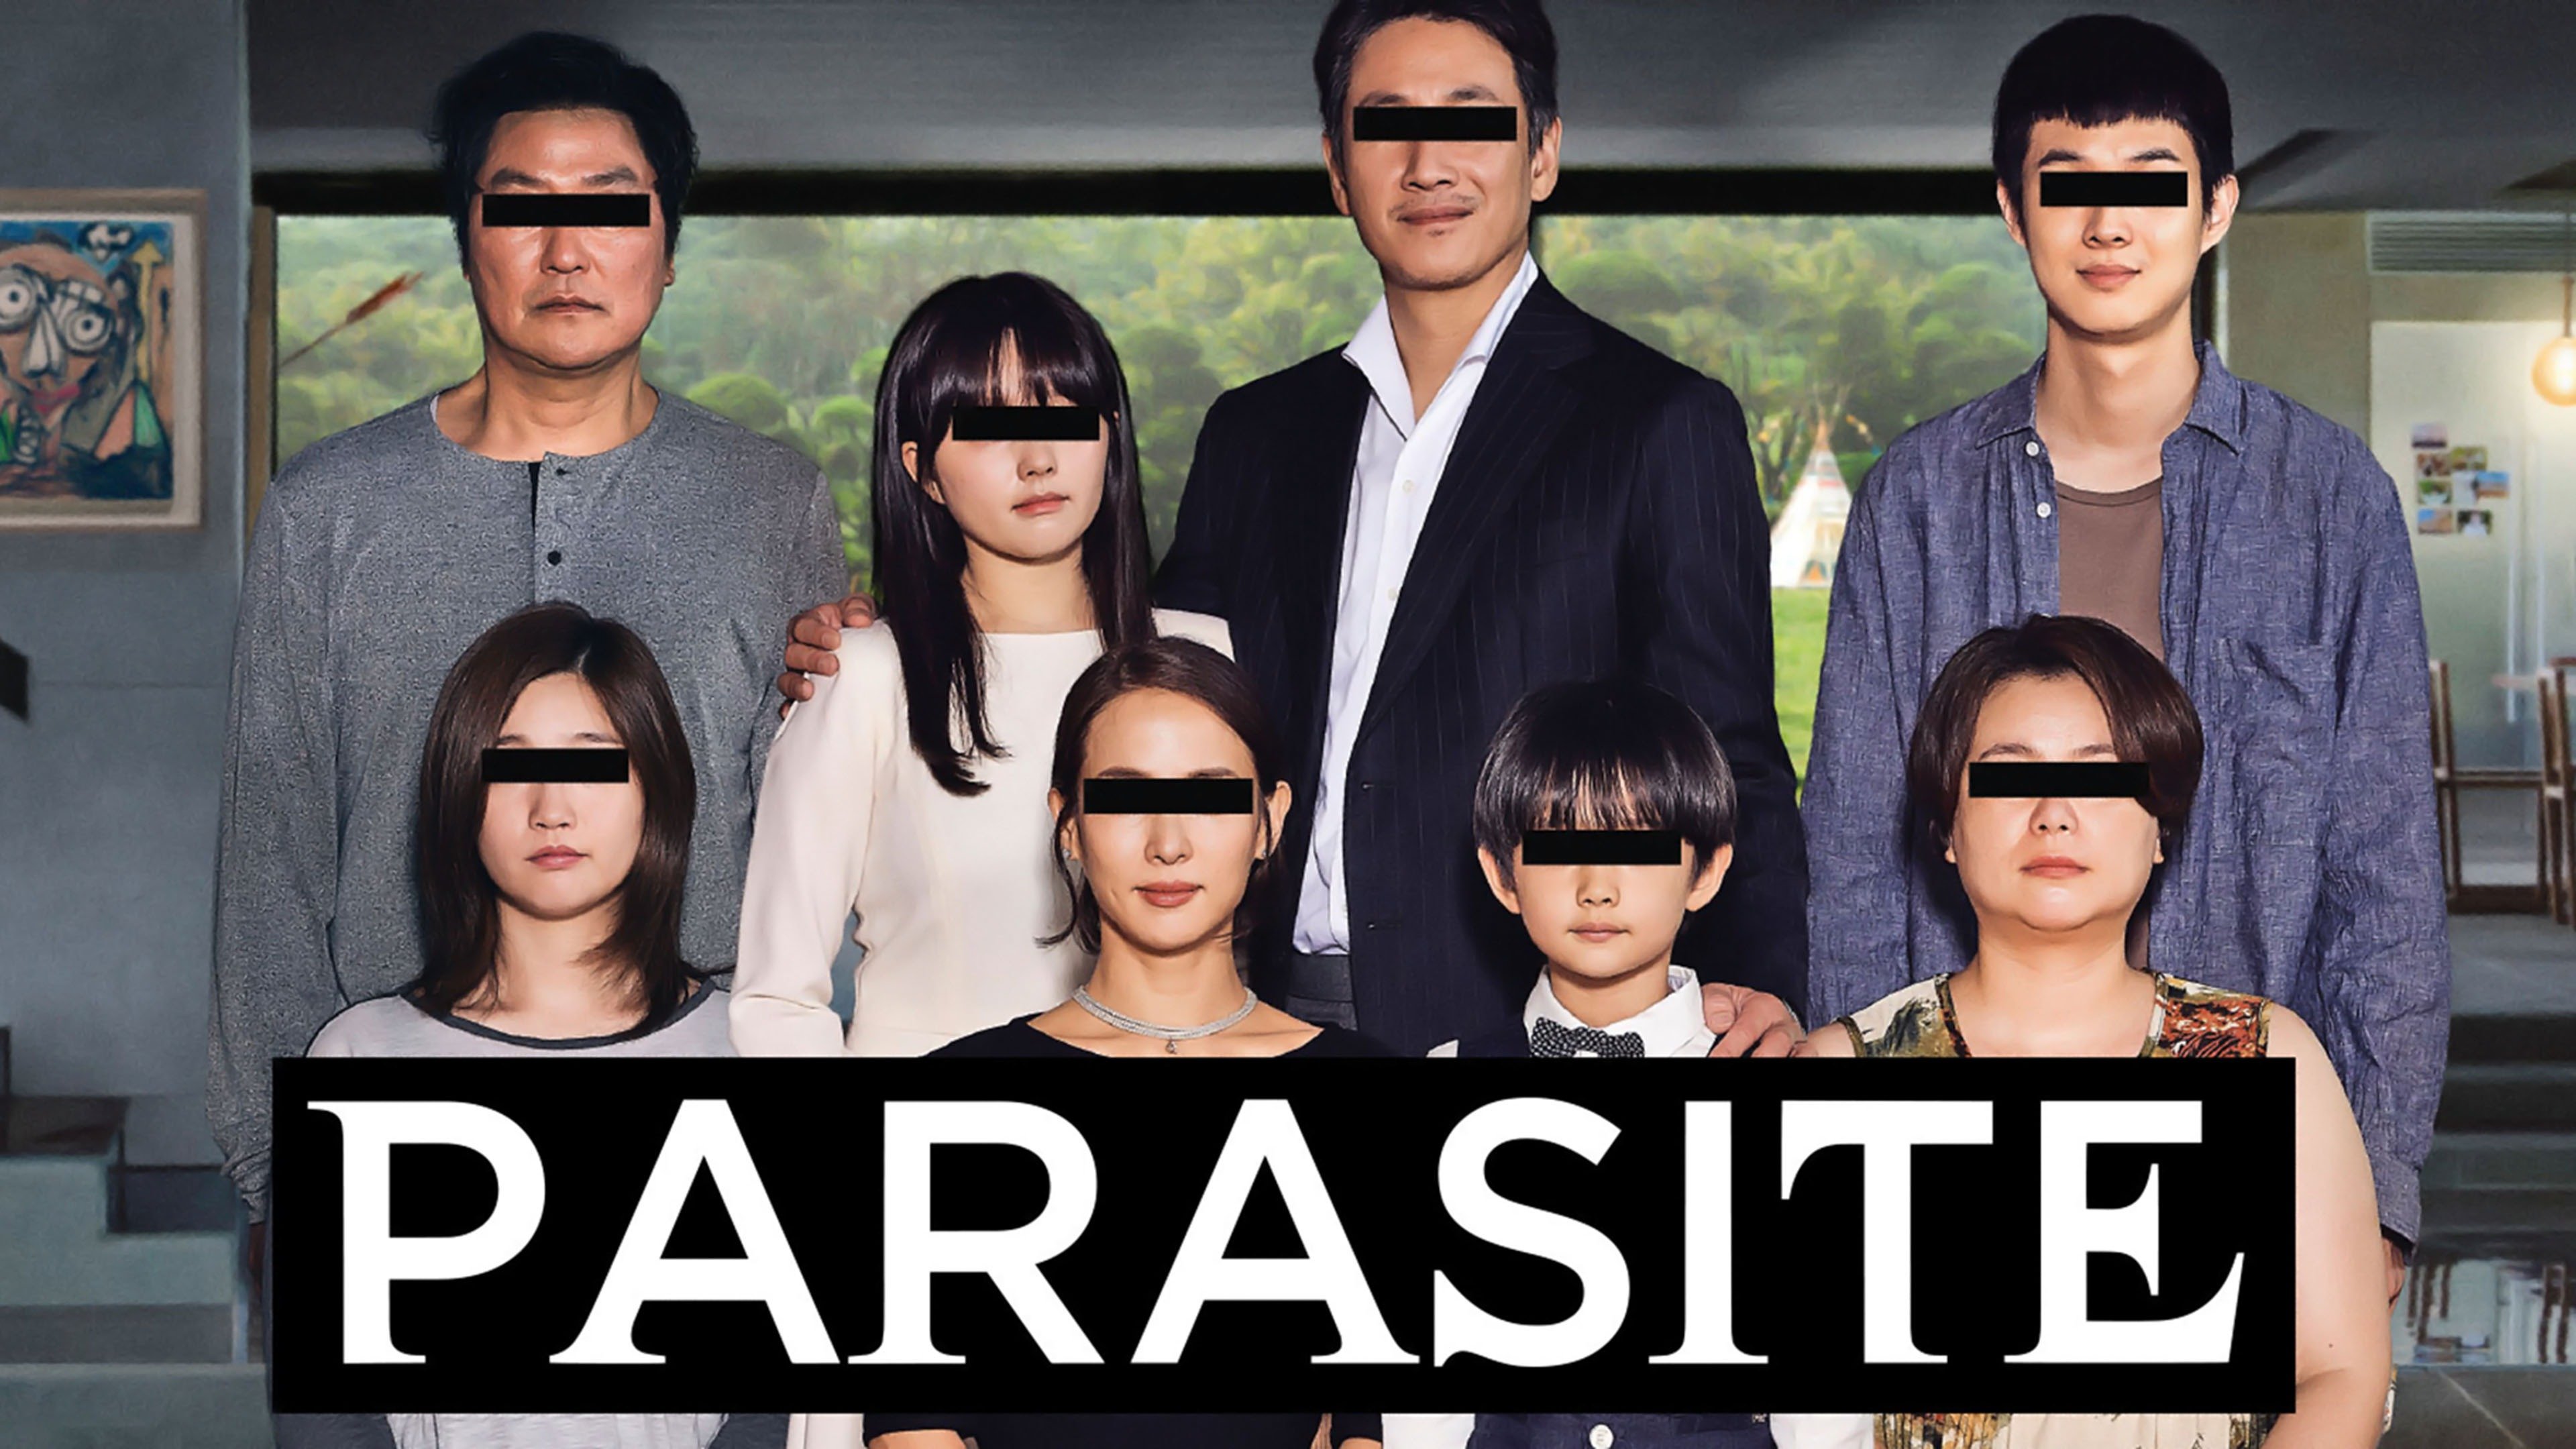 What Is Parasite About? Oscars Best Picture Winner, Explained